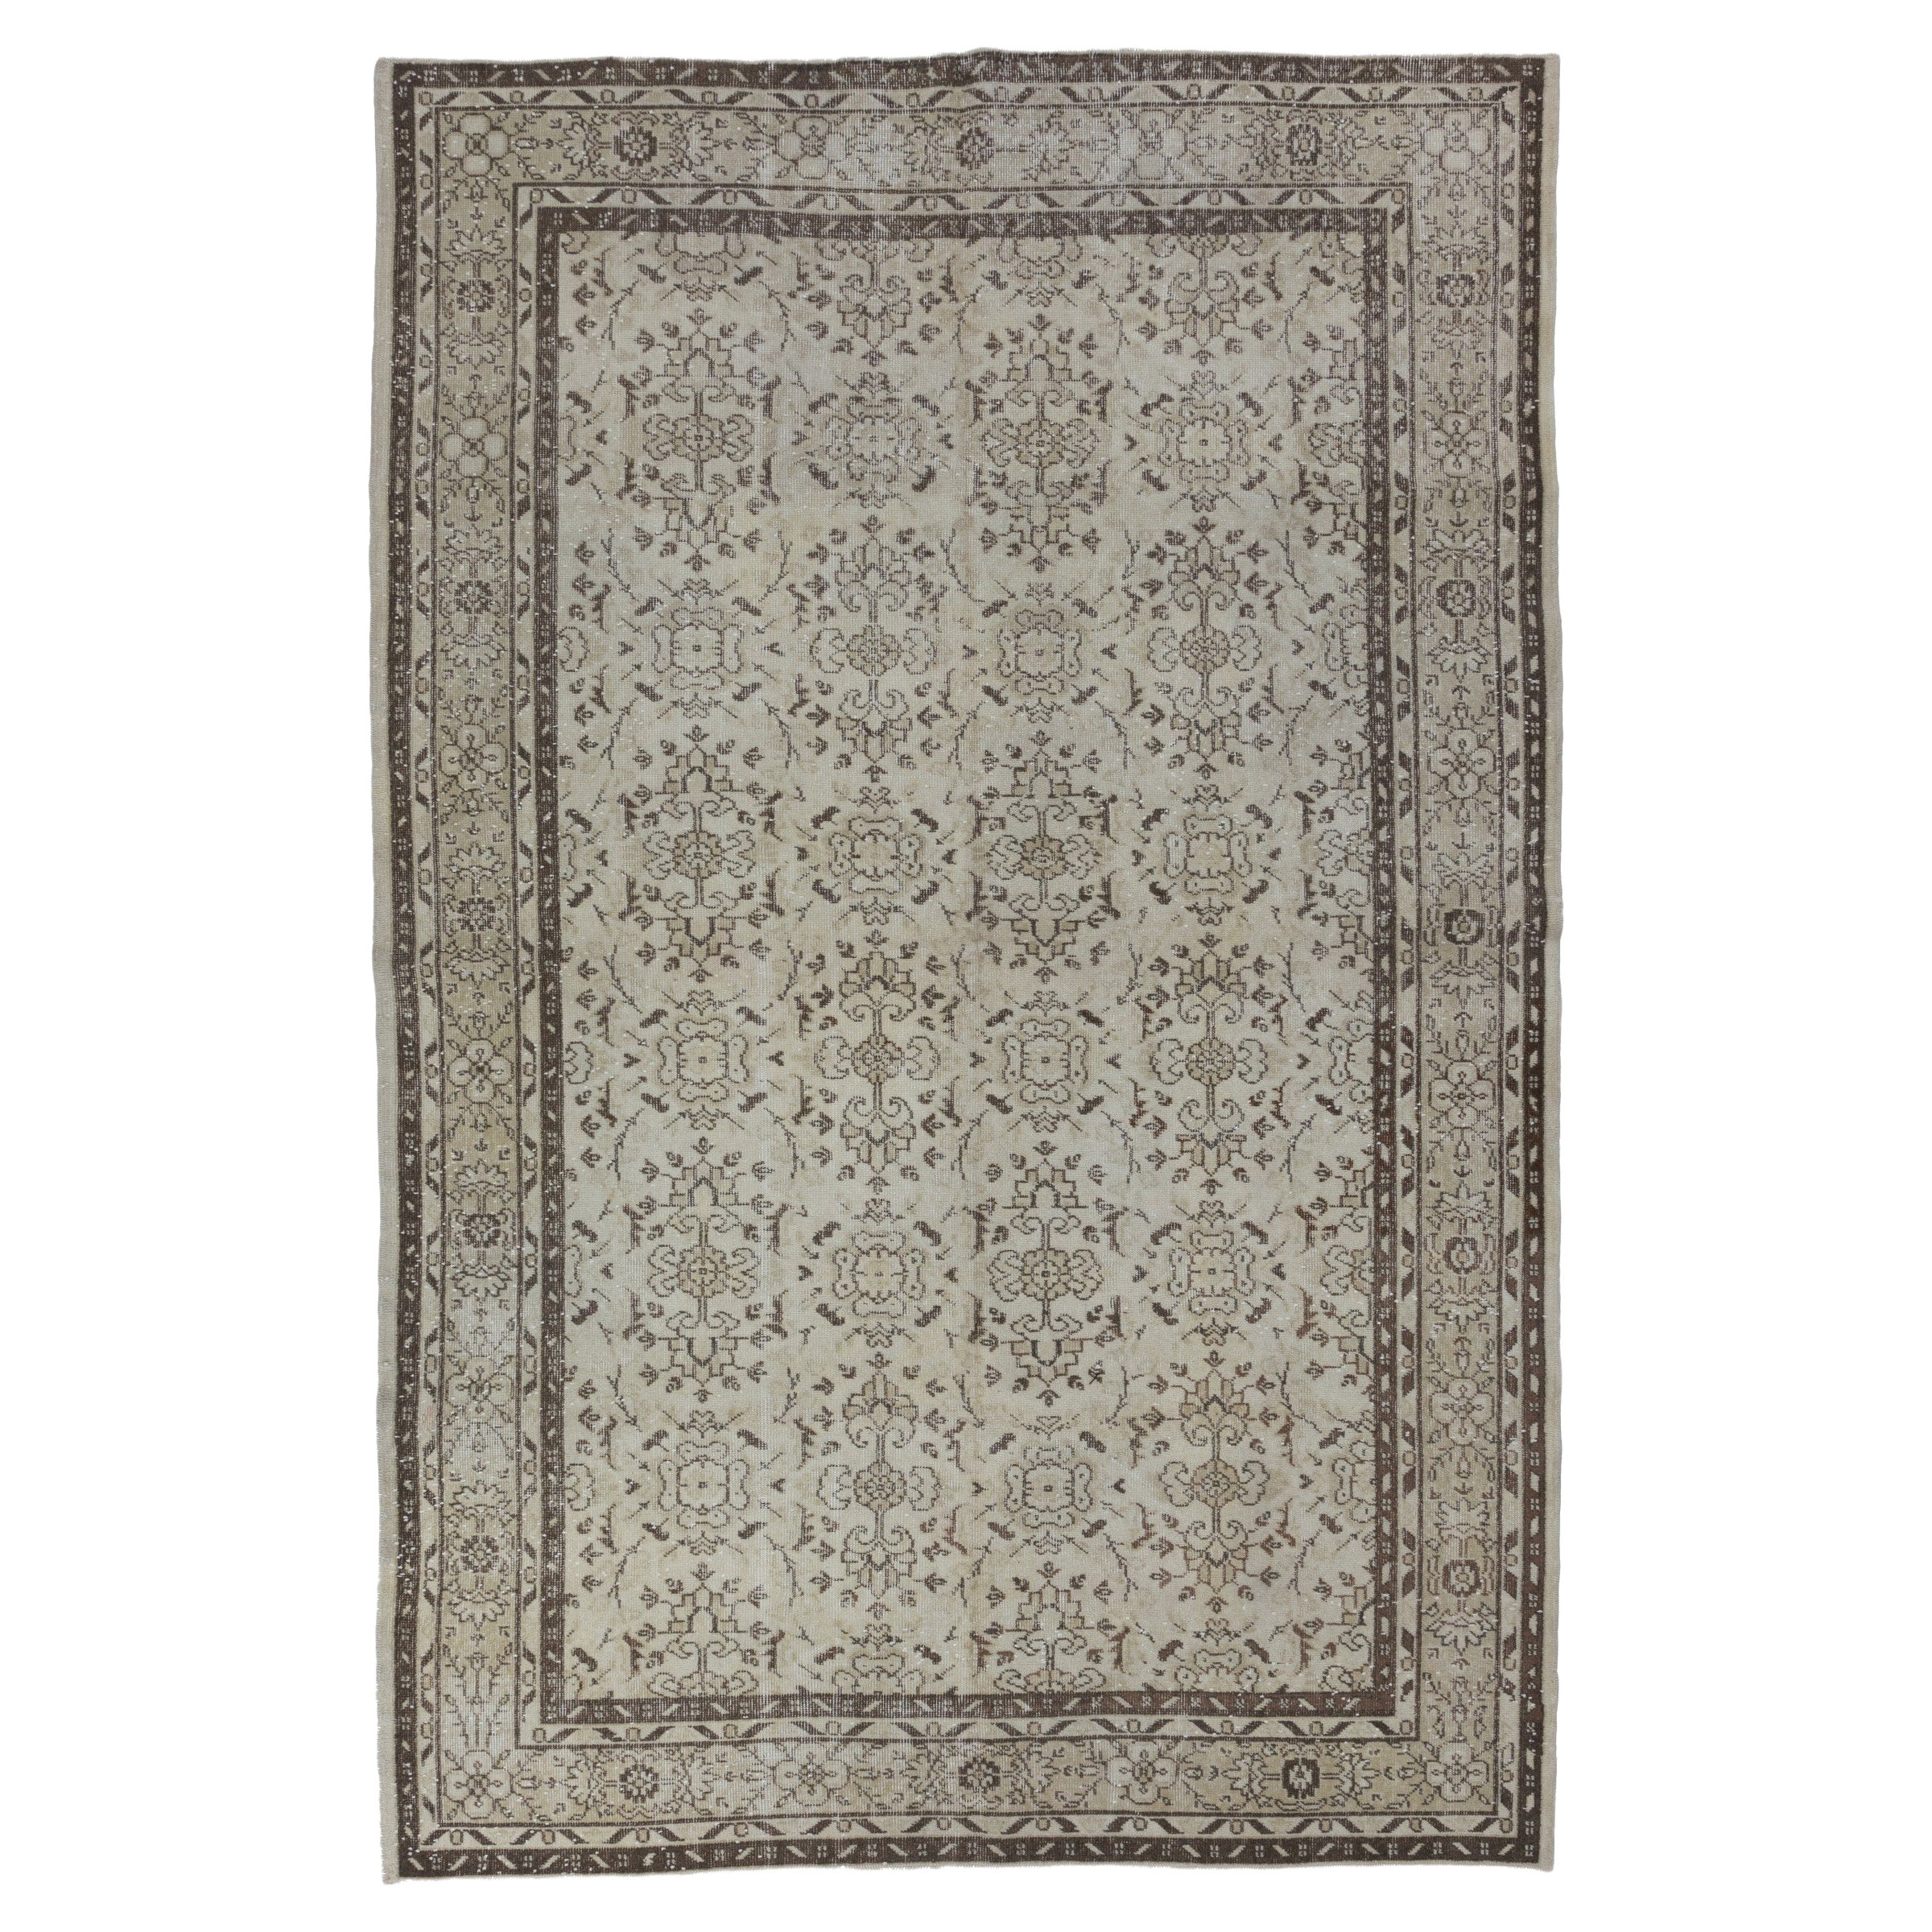 7.2x10.4 Ft Vintage Turkish Area Rug in Neutral Beige, Brown, Off White Colors. 